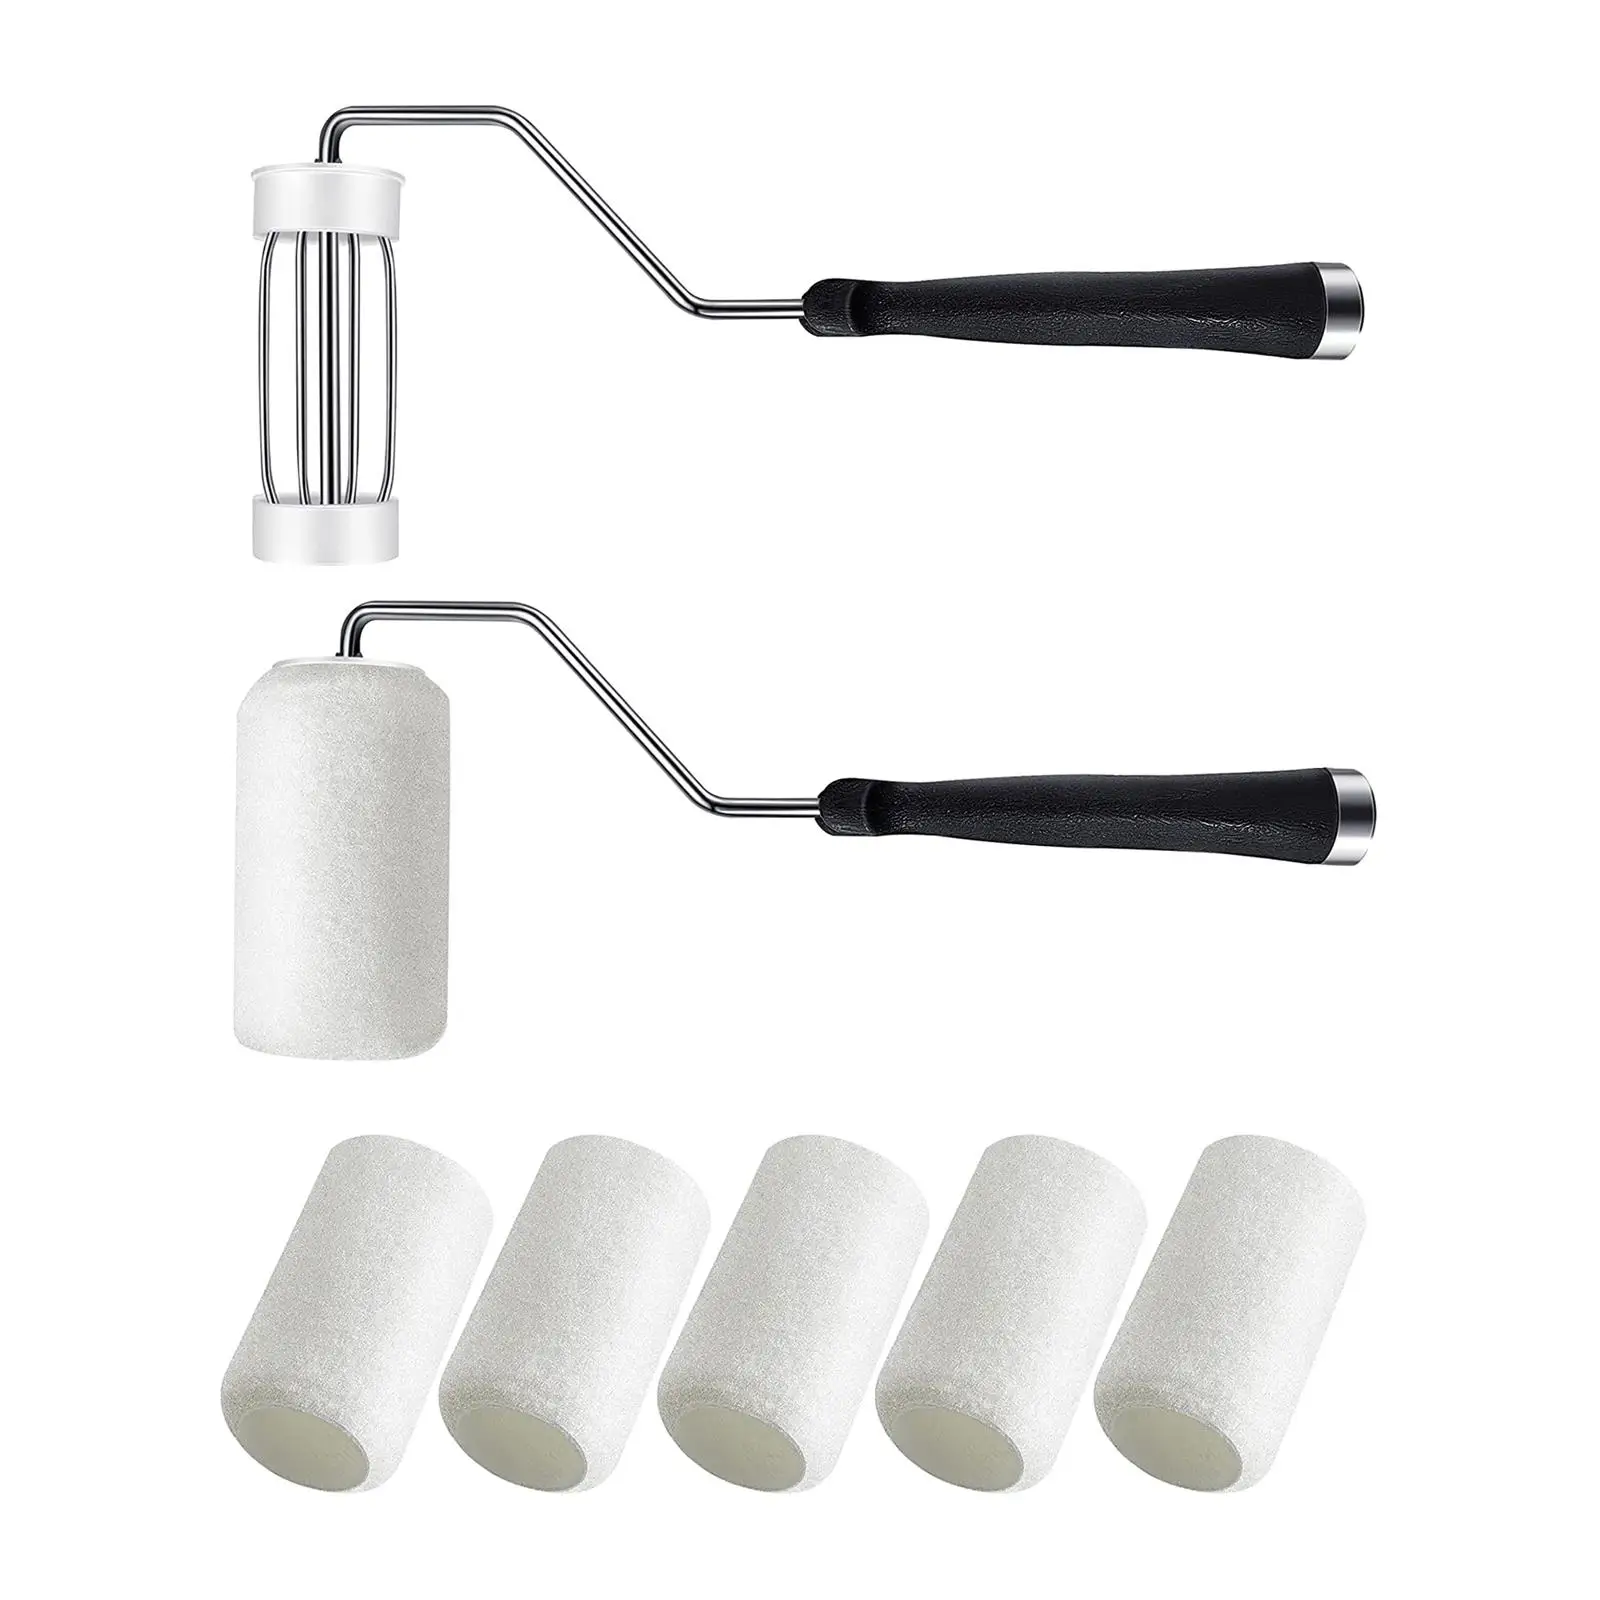 Handle Sponge Paint Roller of 8 Tool Painting Decorative DIY for Ceiling Wall Painting Interior